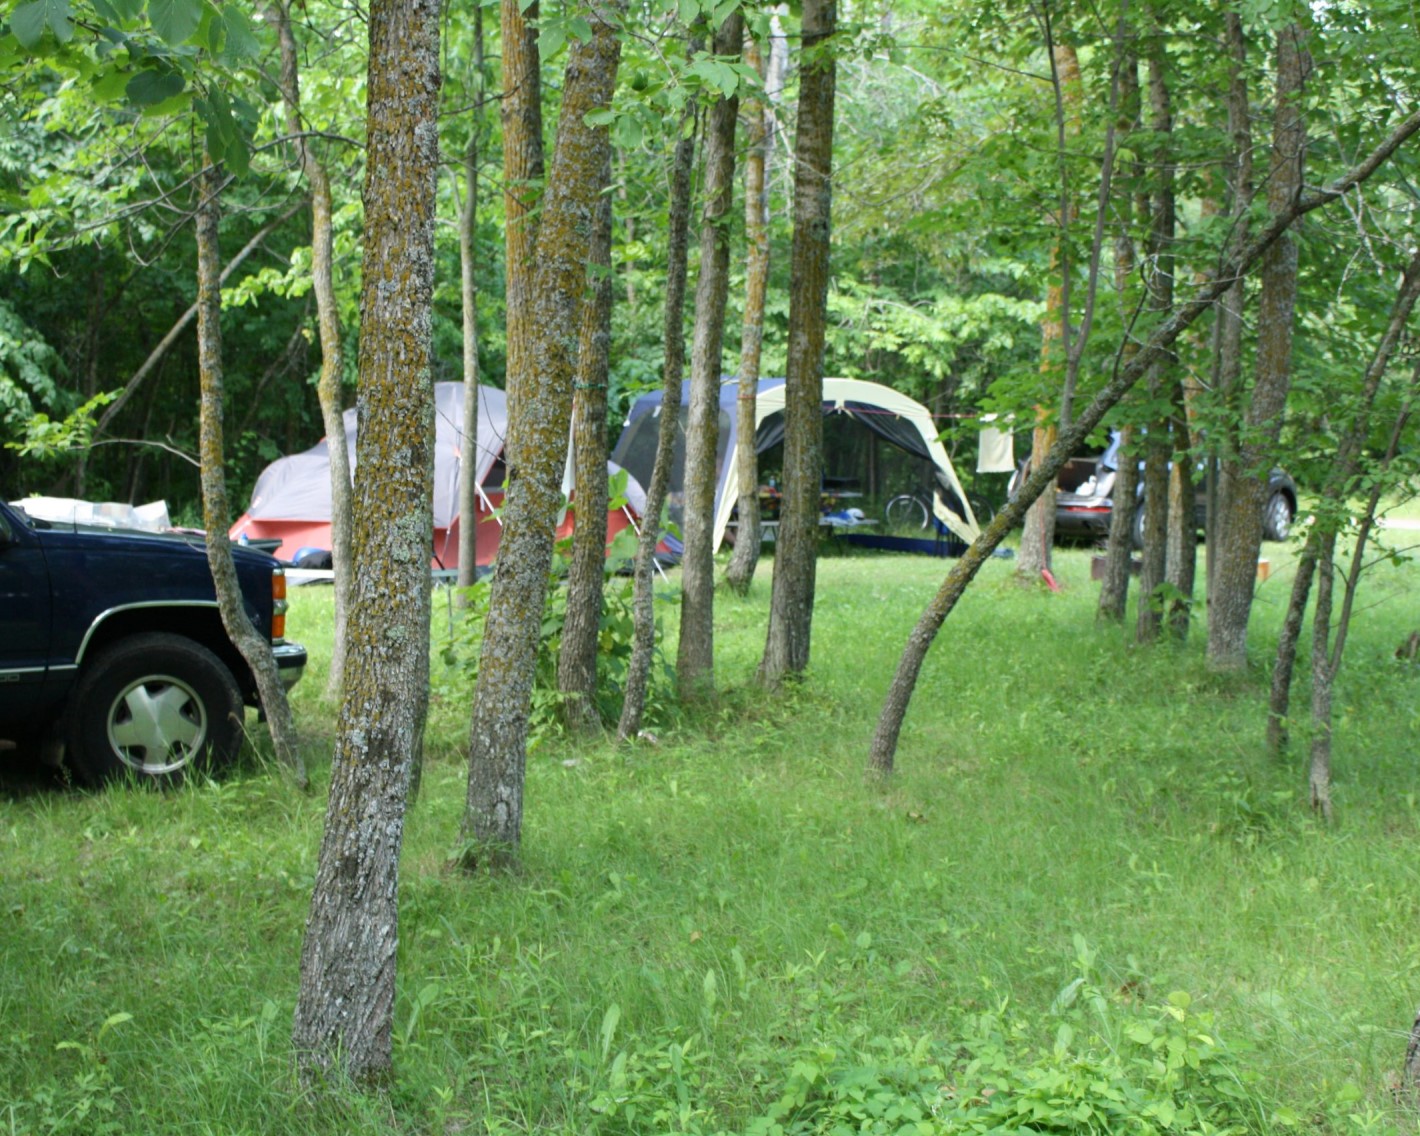 Picture of a Family Camp tent site, showing a car parked on green grass with two tents set up inside